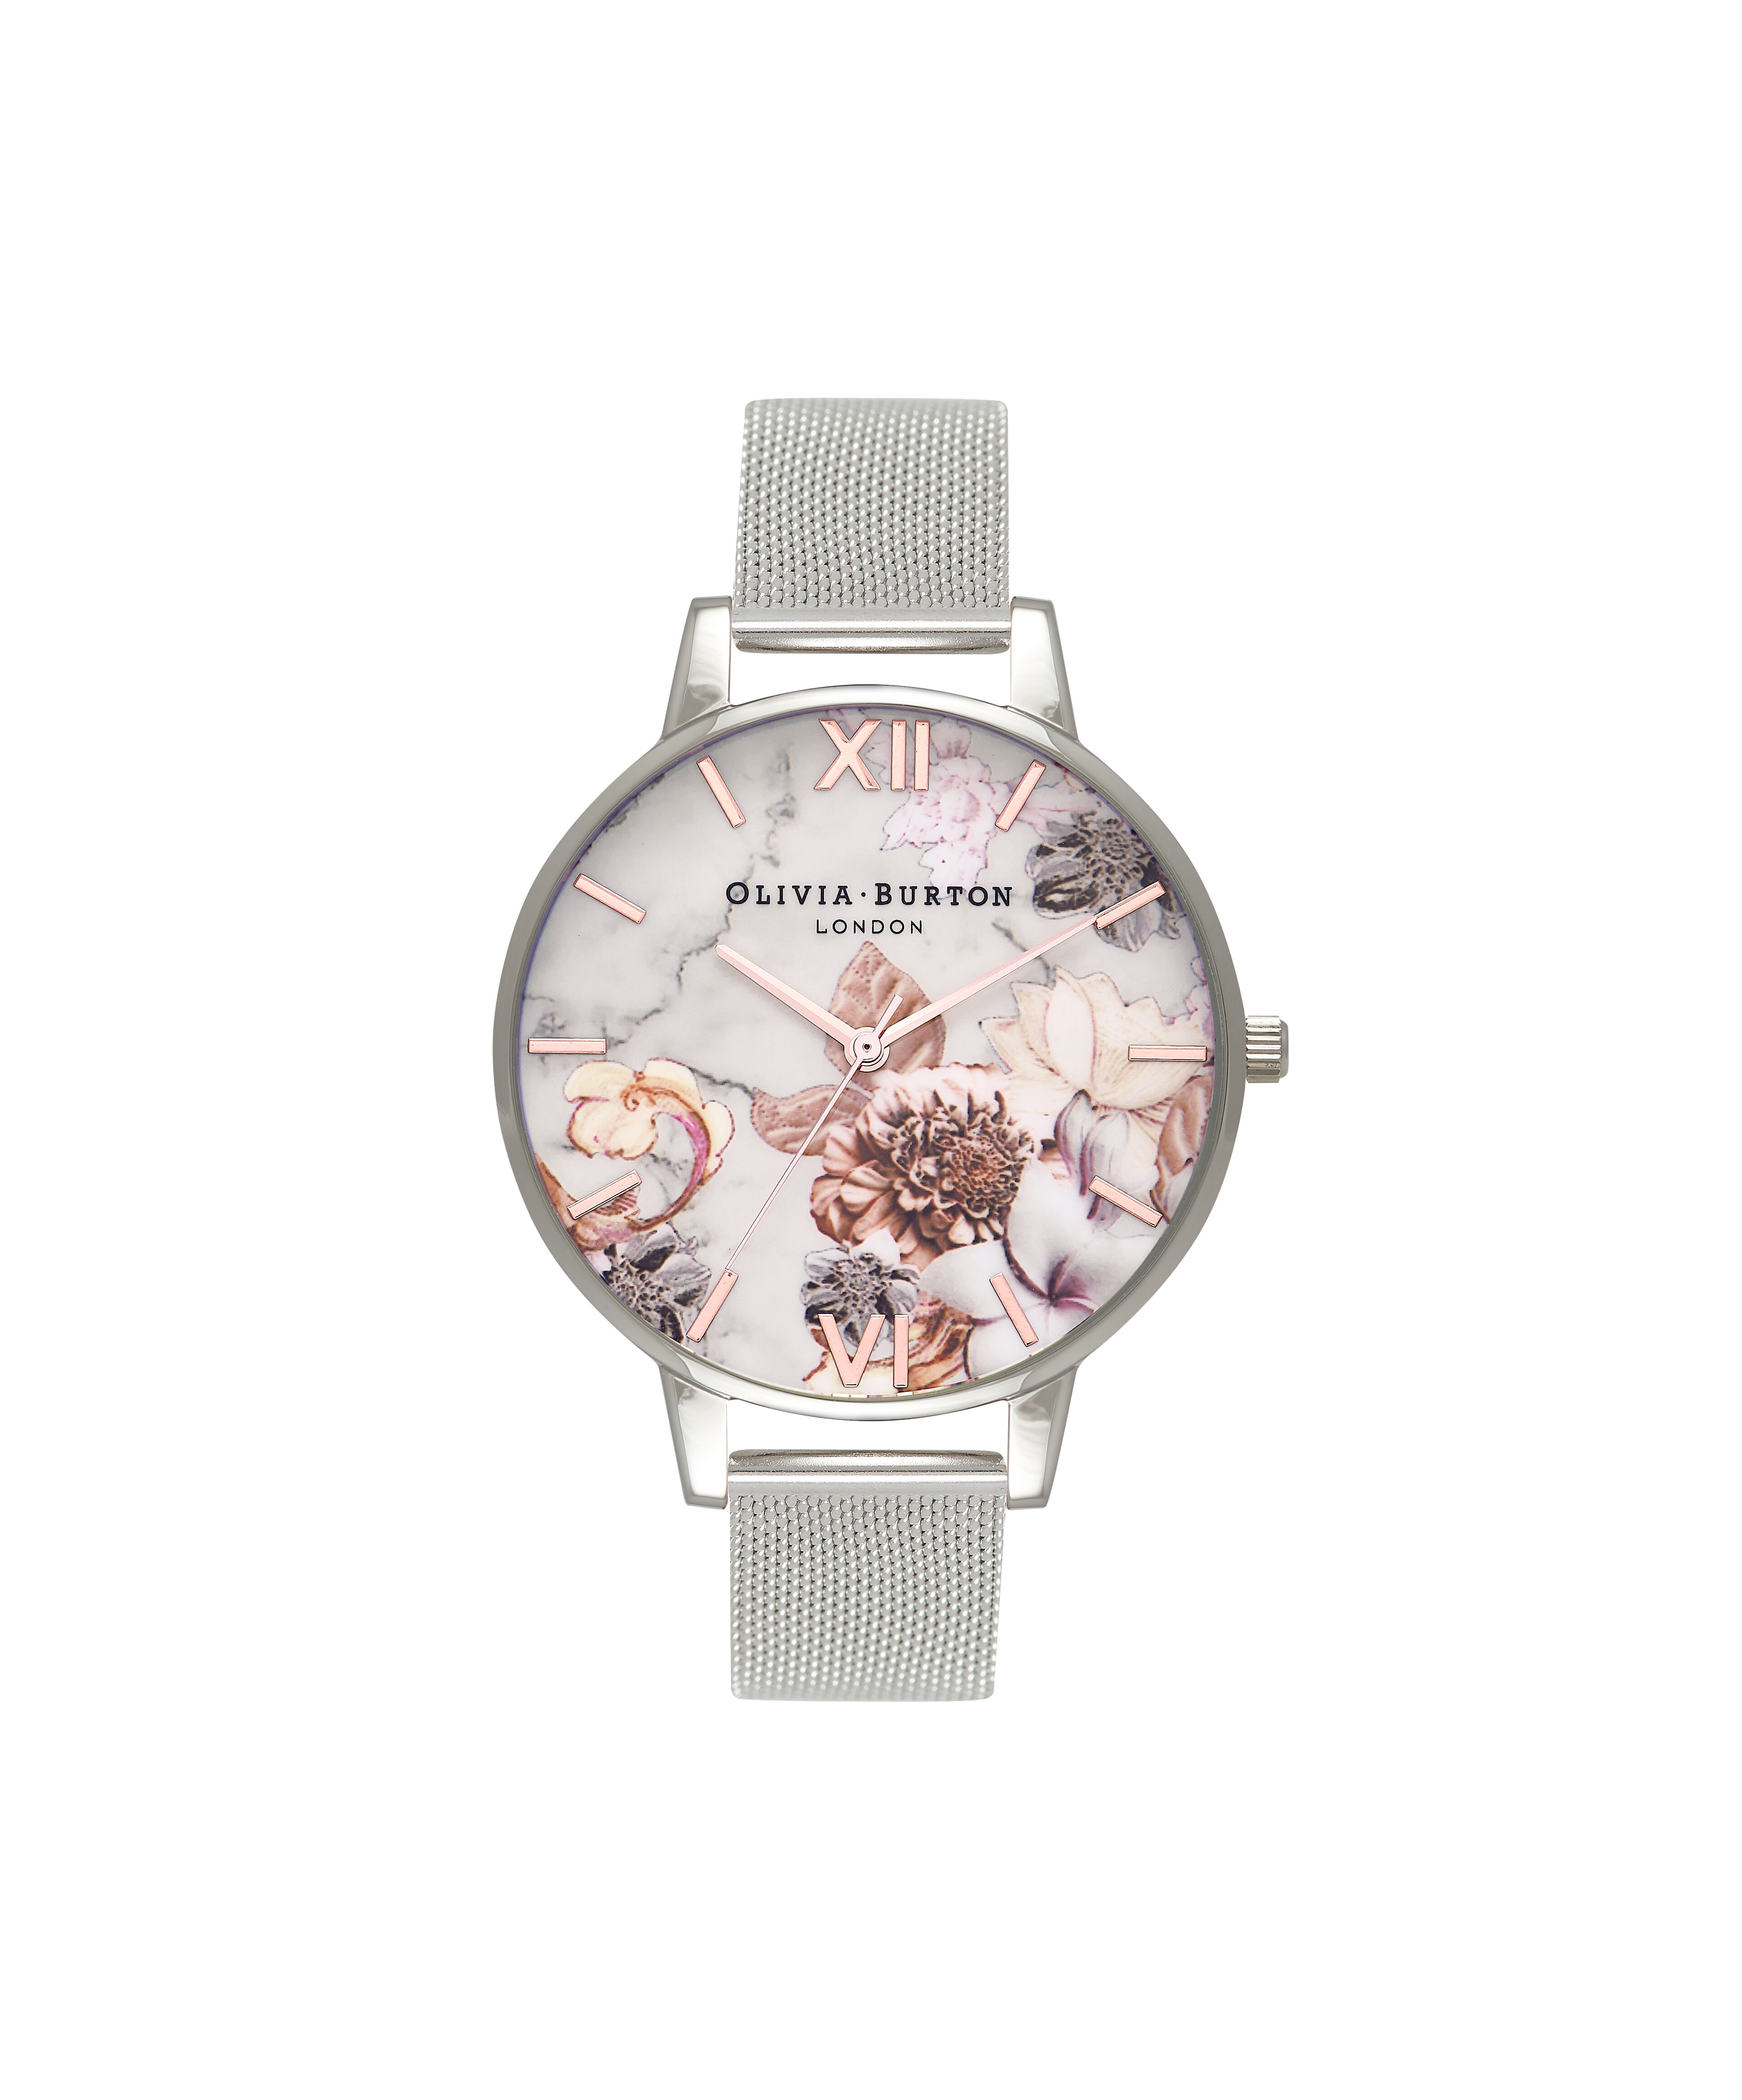 Olivia burton Abstract Florals Analog Multicolor Dial Women's Watch-OB16VM12  : Amazon.in: Watches